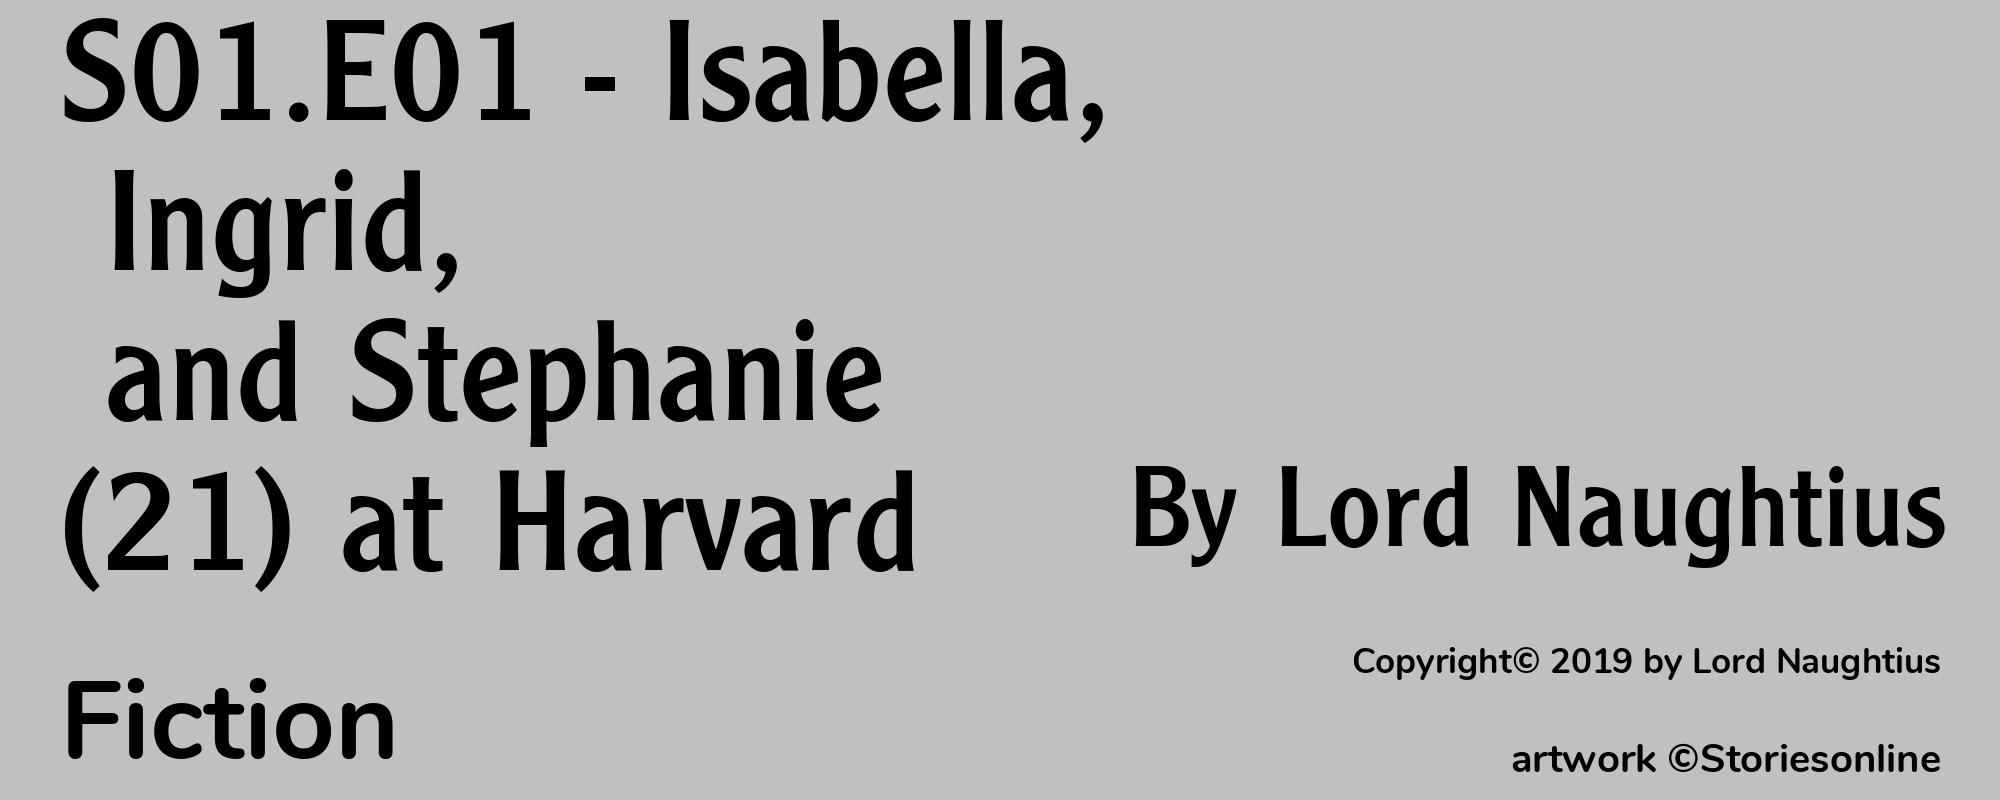 S01.E01 - Isabella, Ingrid, and Stephanie (21) at Harvard - Cover